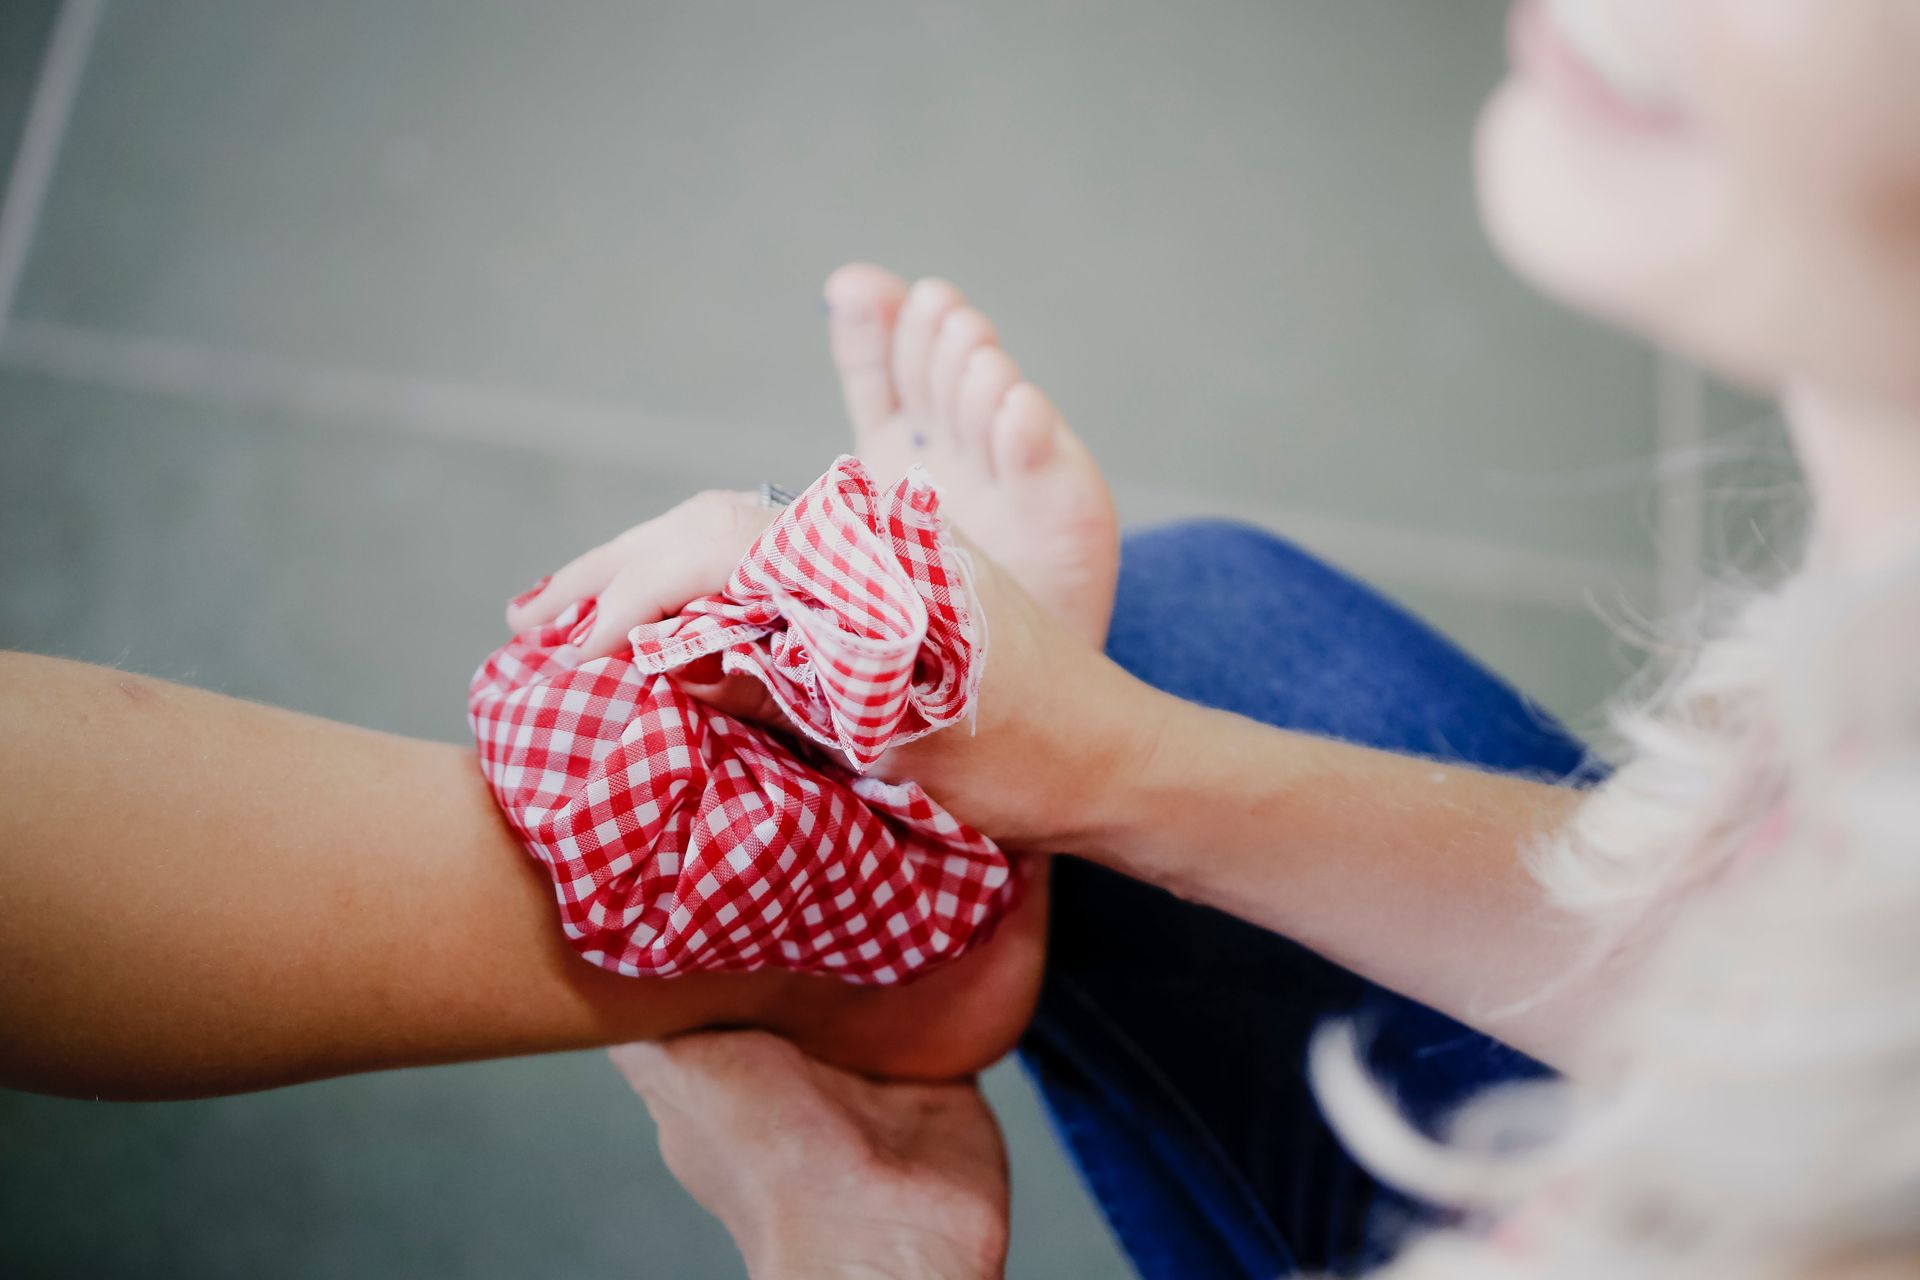 a person has a red and white checkered bag on their foot